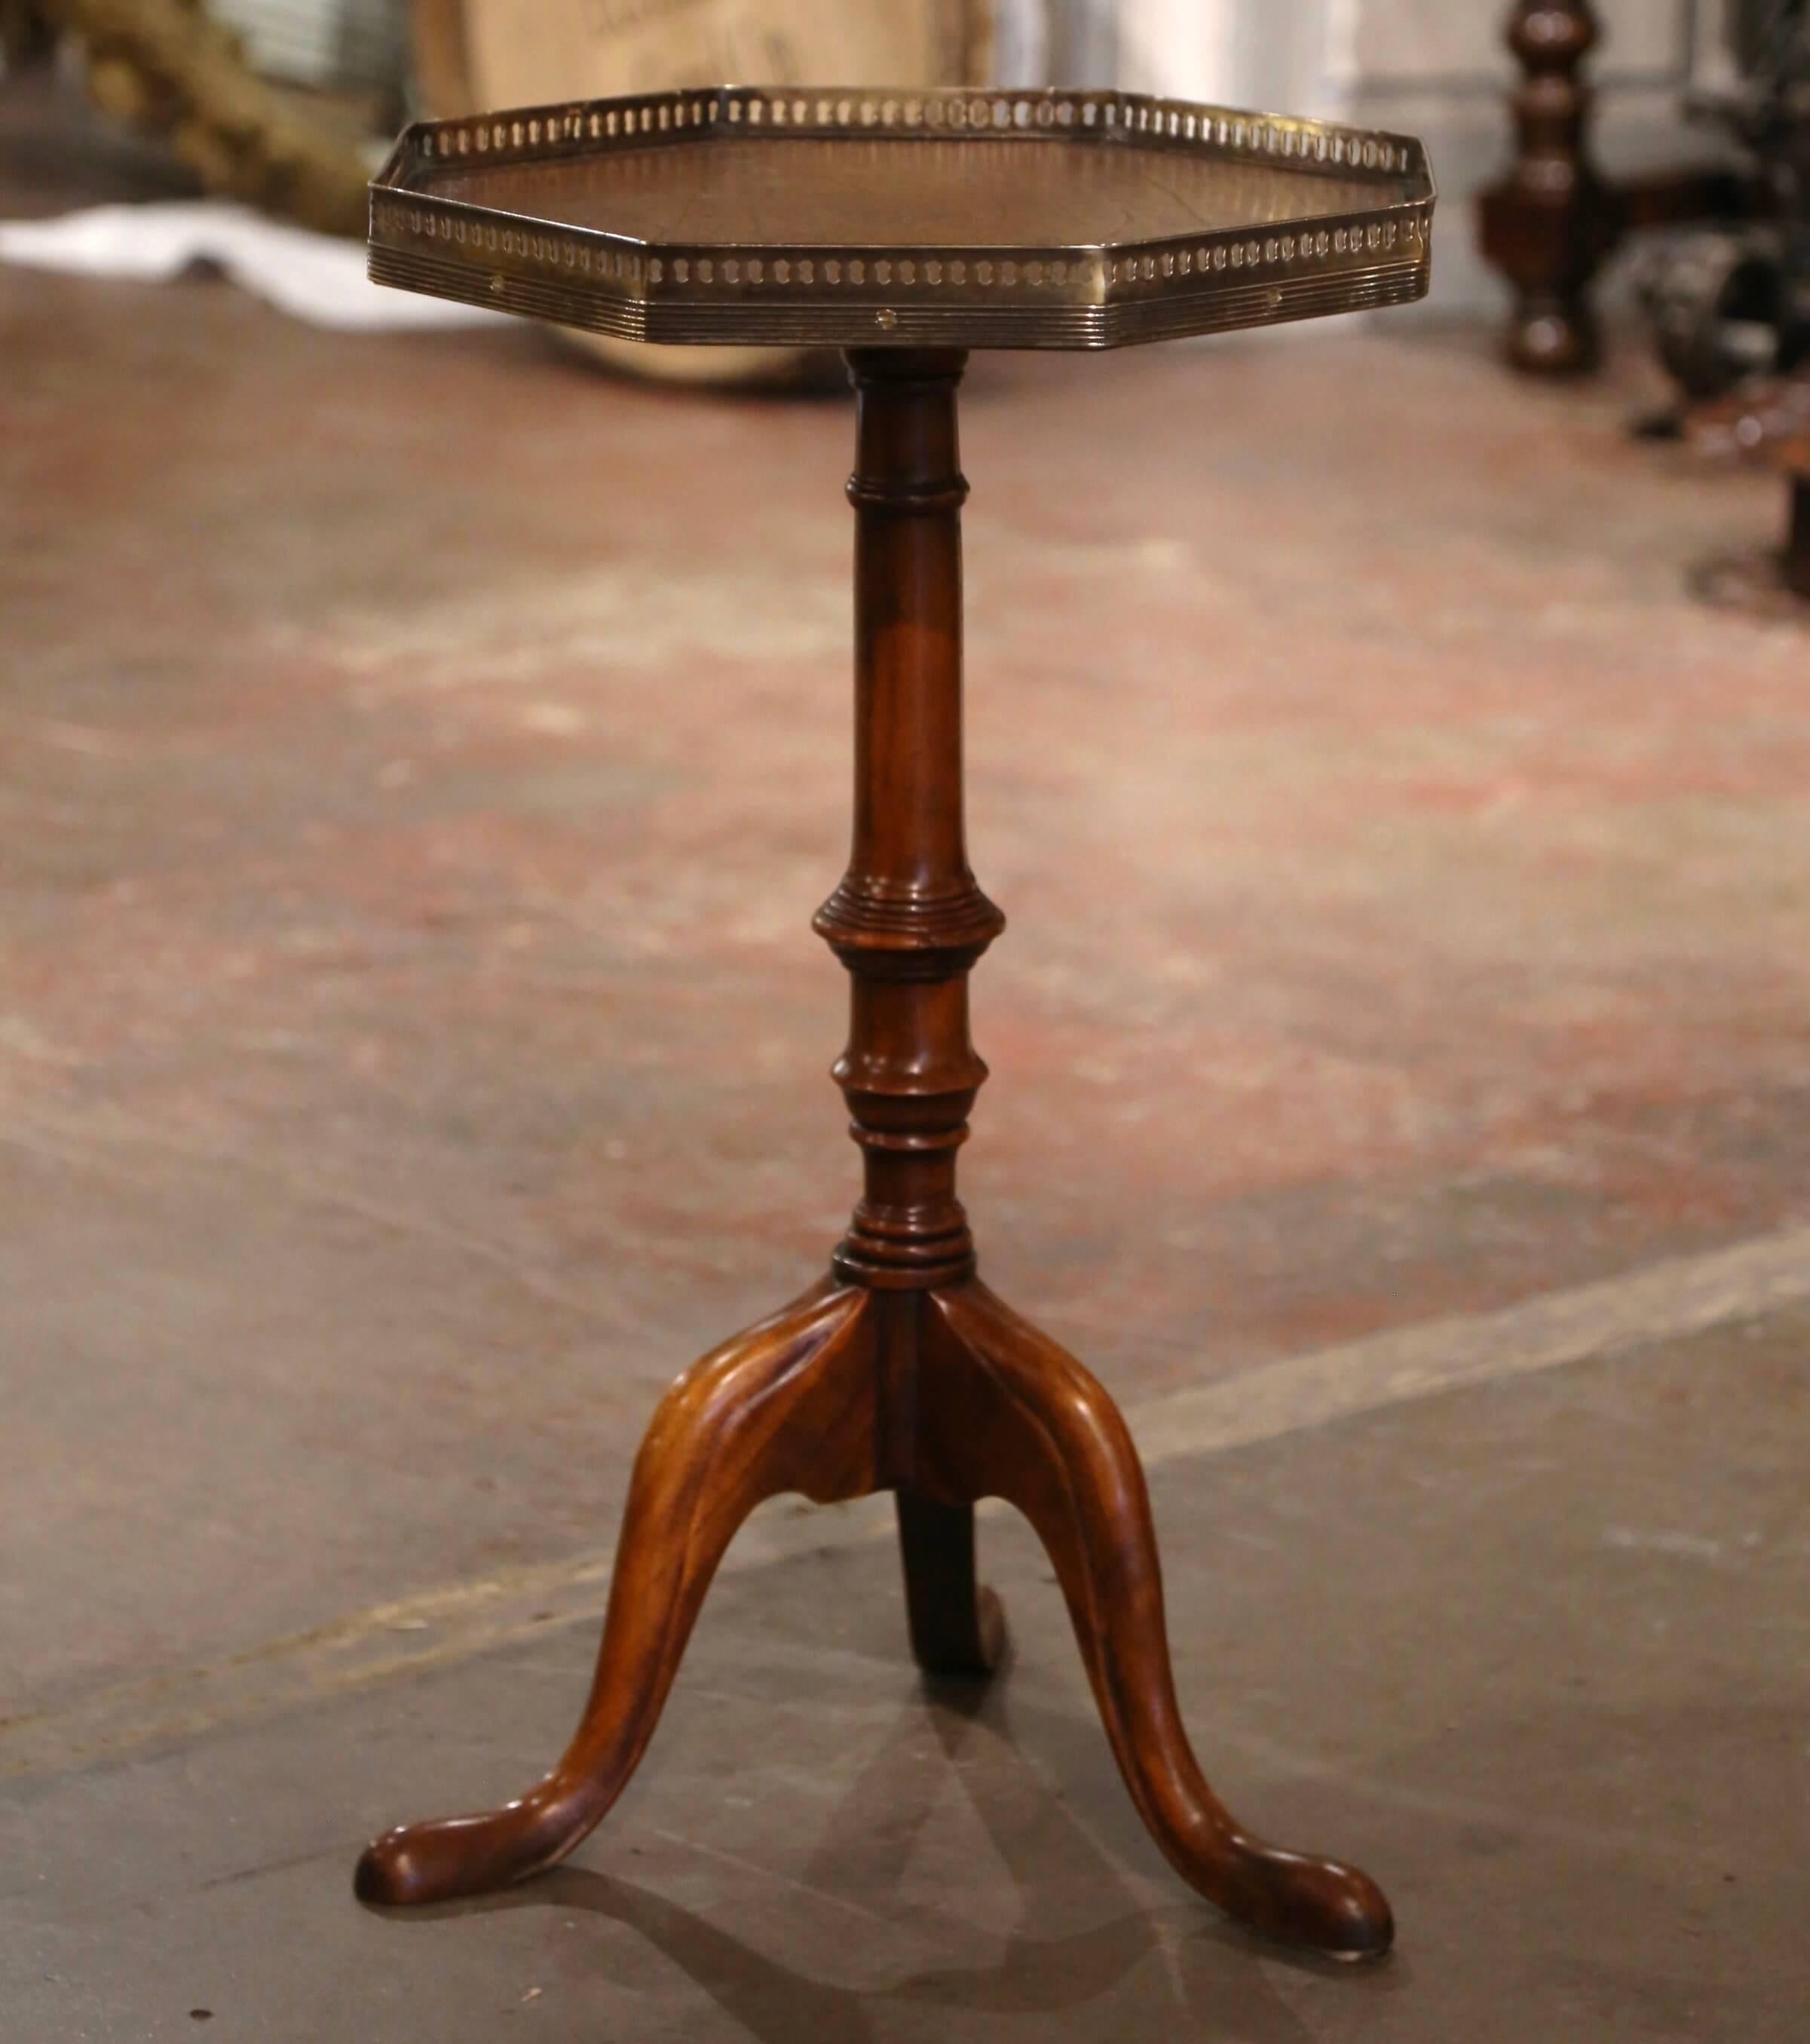 Decorate a den or living room with this elegant side table. Crafted in England circa 1990, the table stands on a carved turned pedestal base ending with three scrolled legs; the octagonal surface is dressed with a brown leather top decorated with